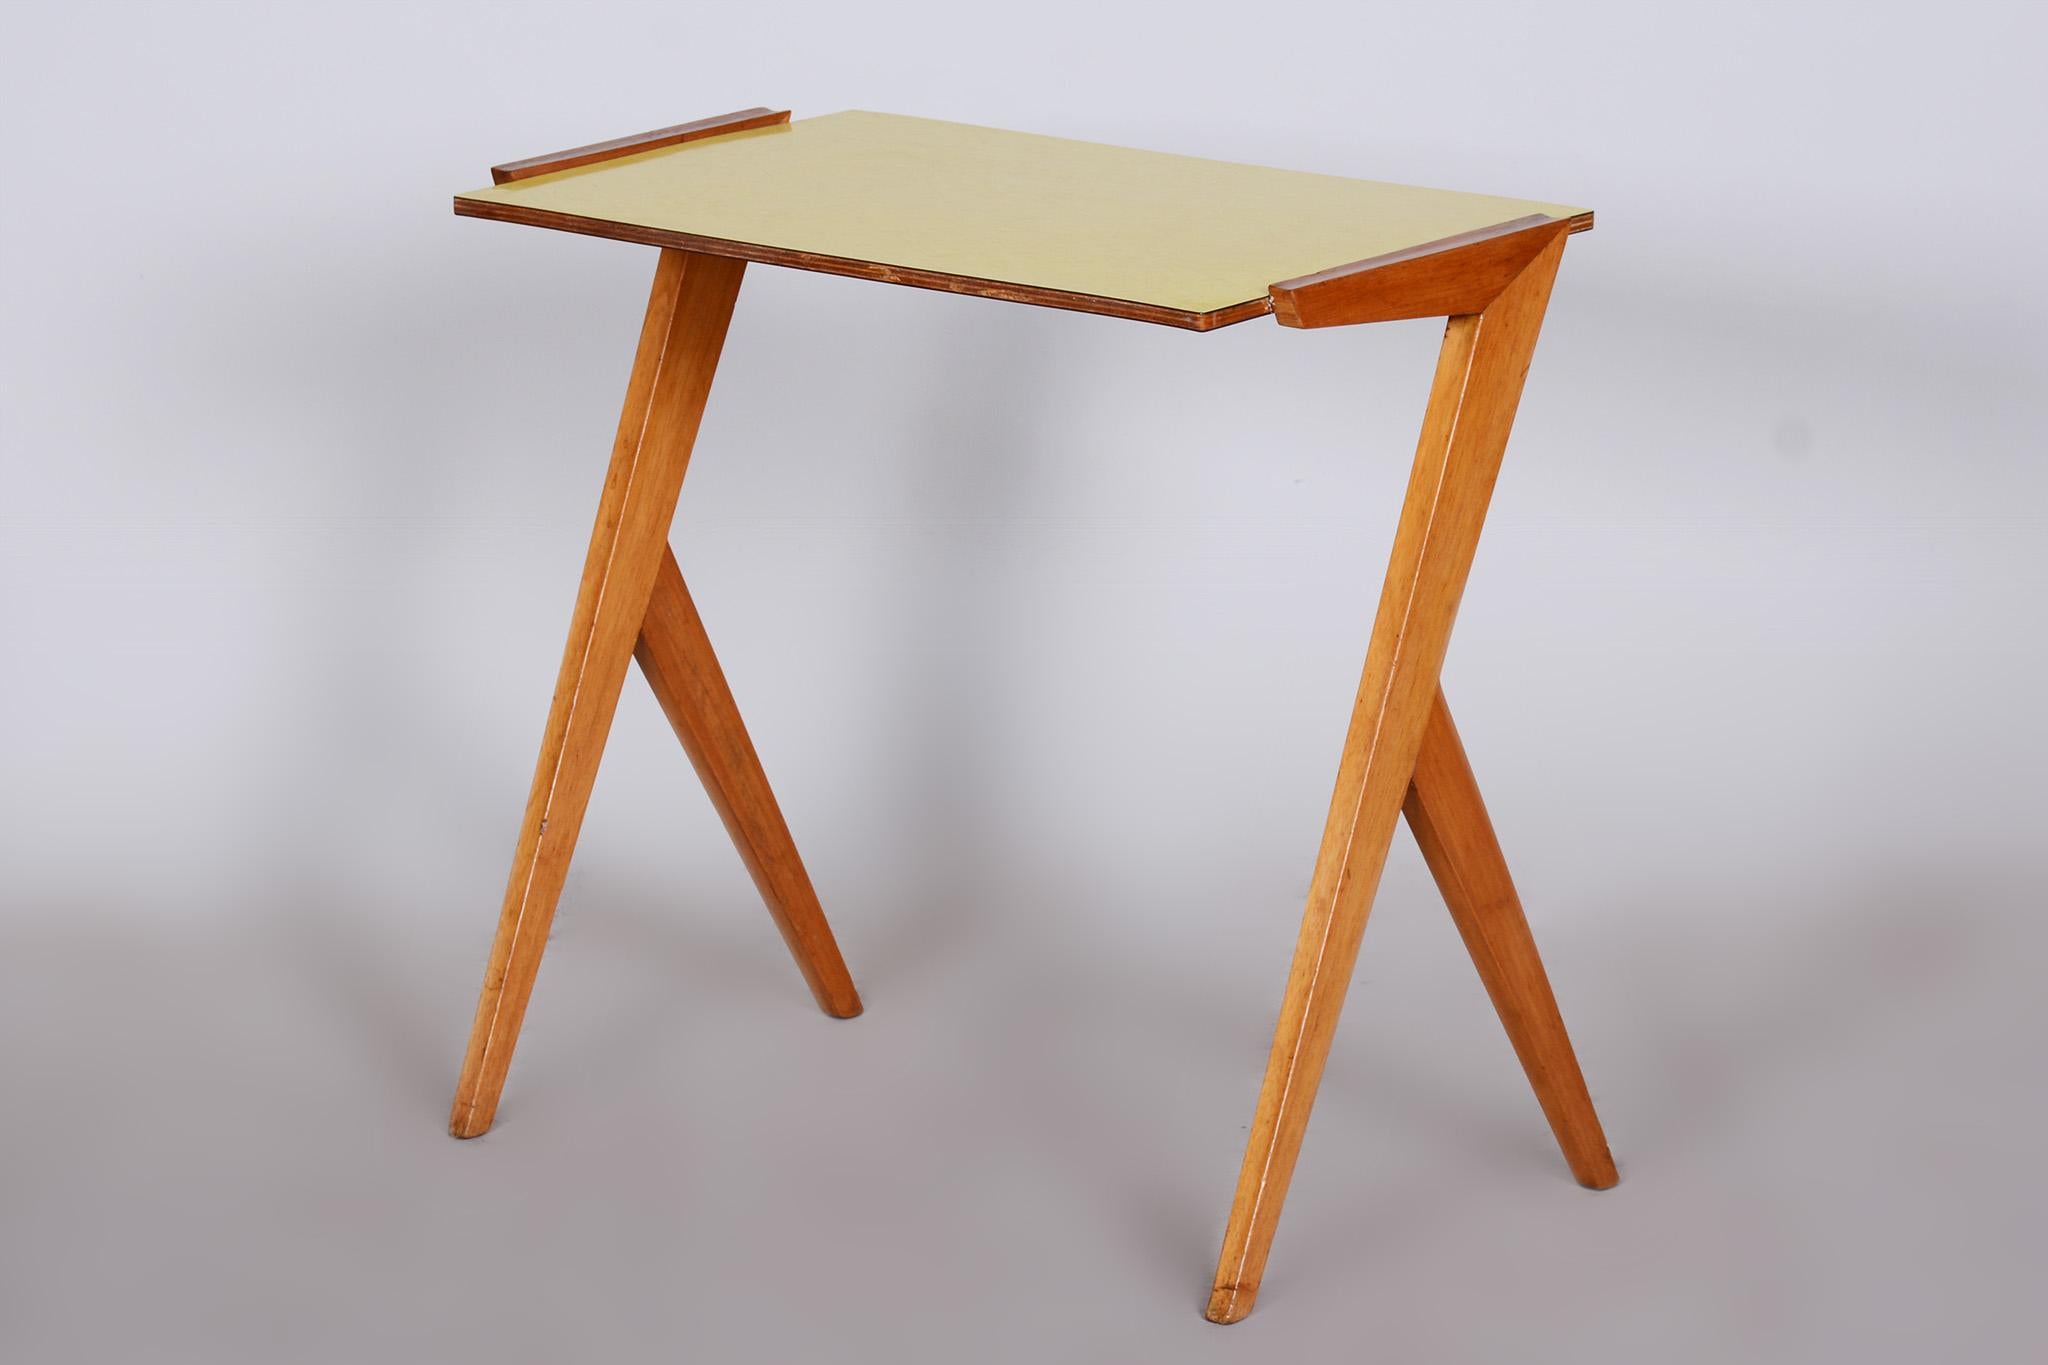 Restored midcentury small yellow table.

Source: Czechia
Period: 1950-1959
Material: Beech, Umakart

Stable construction.
Refreshed polish.